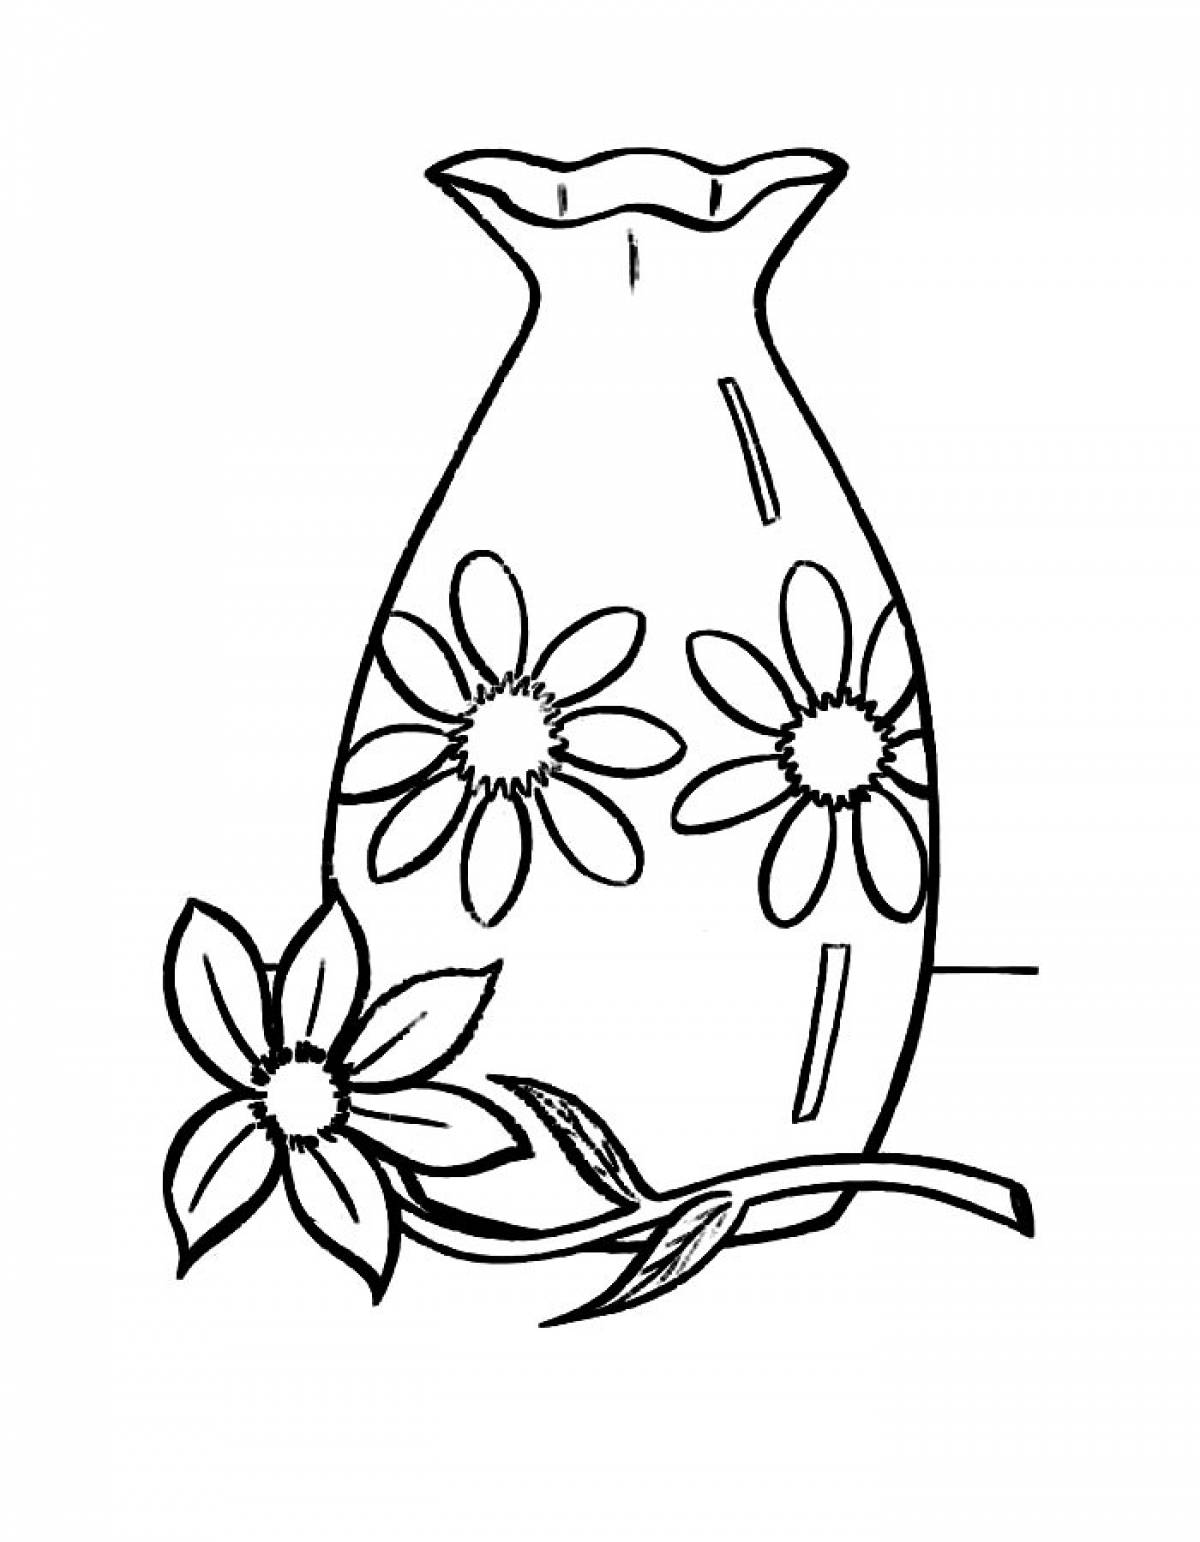 A vase for flowers